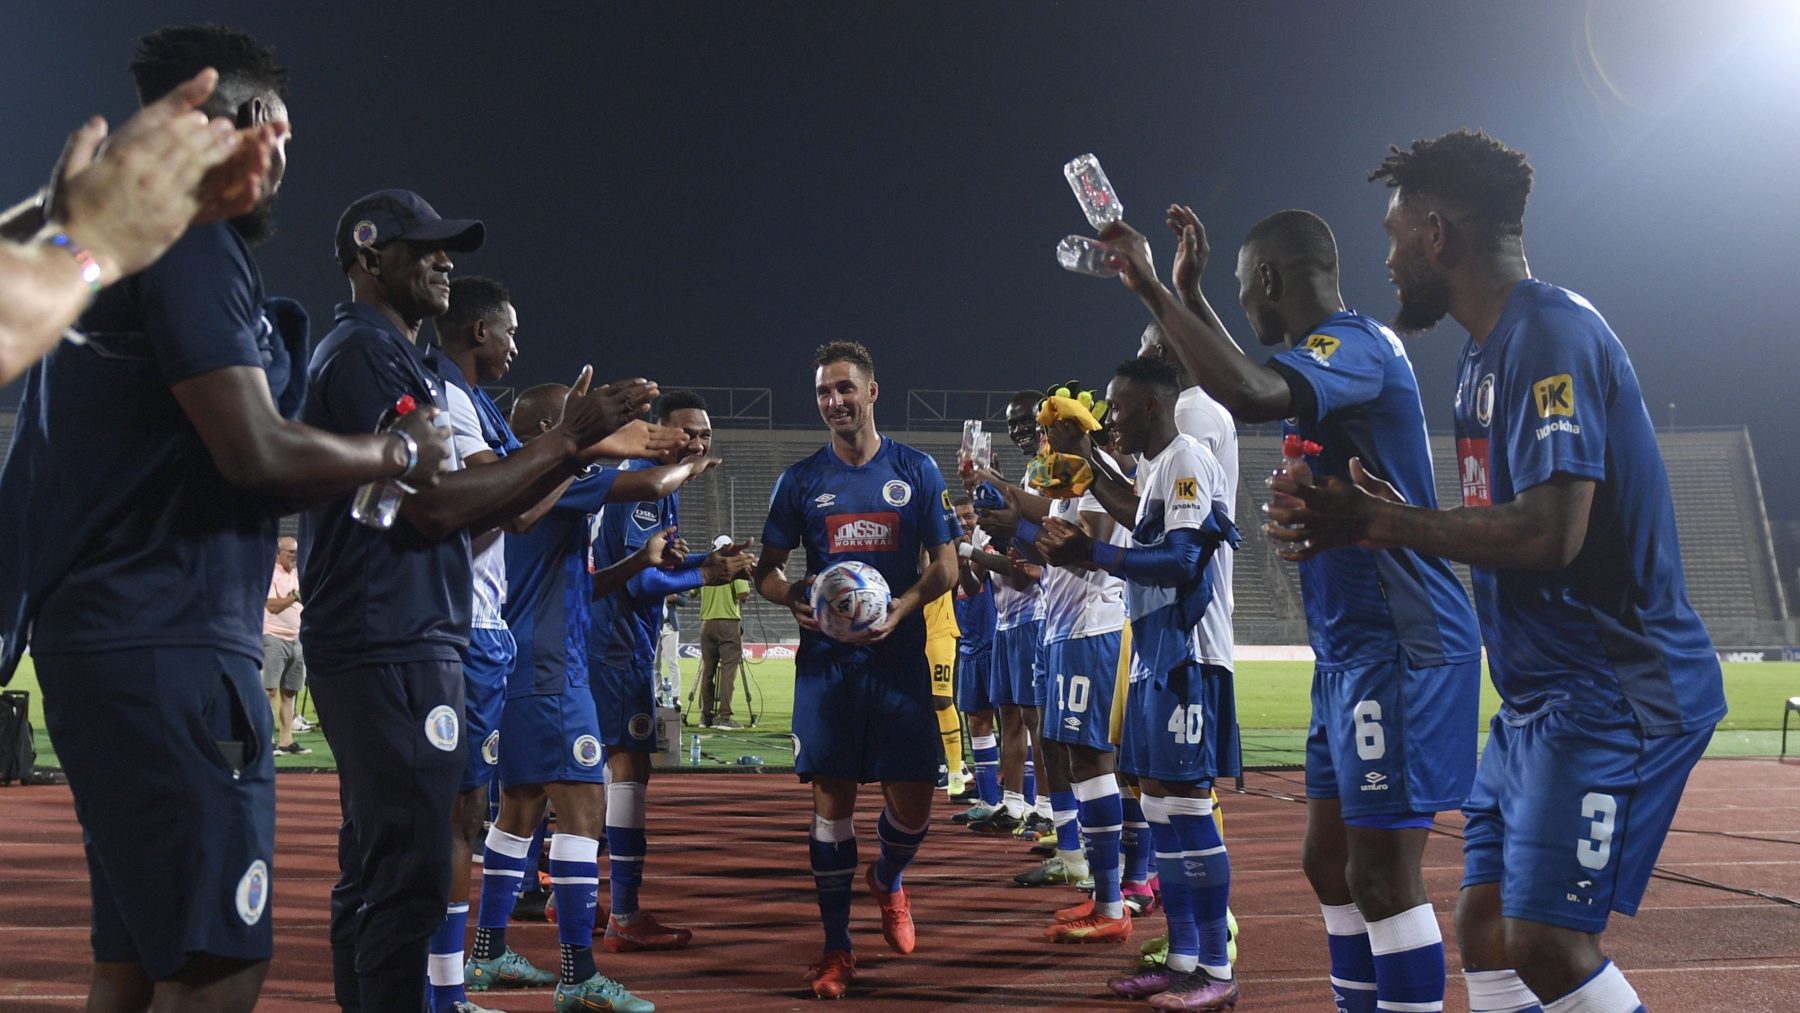 Bradley Grobler's First Words After Scoring His 100th PSL Goal | The ...